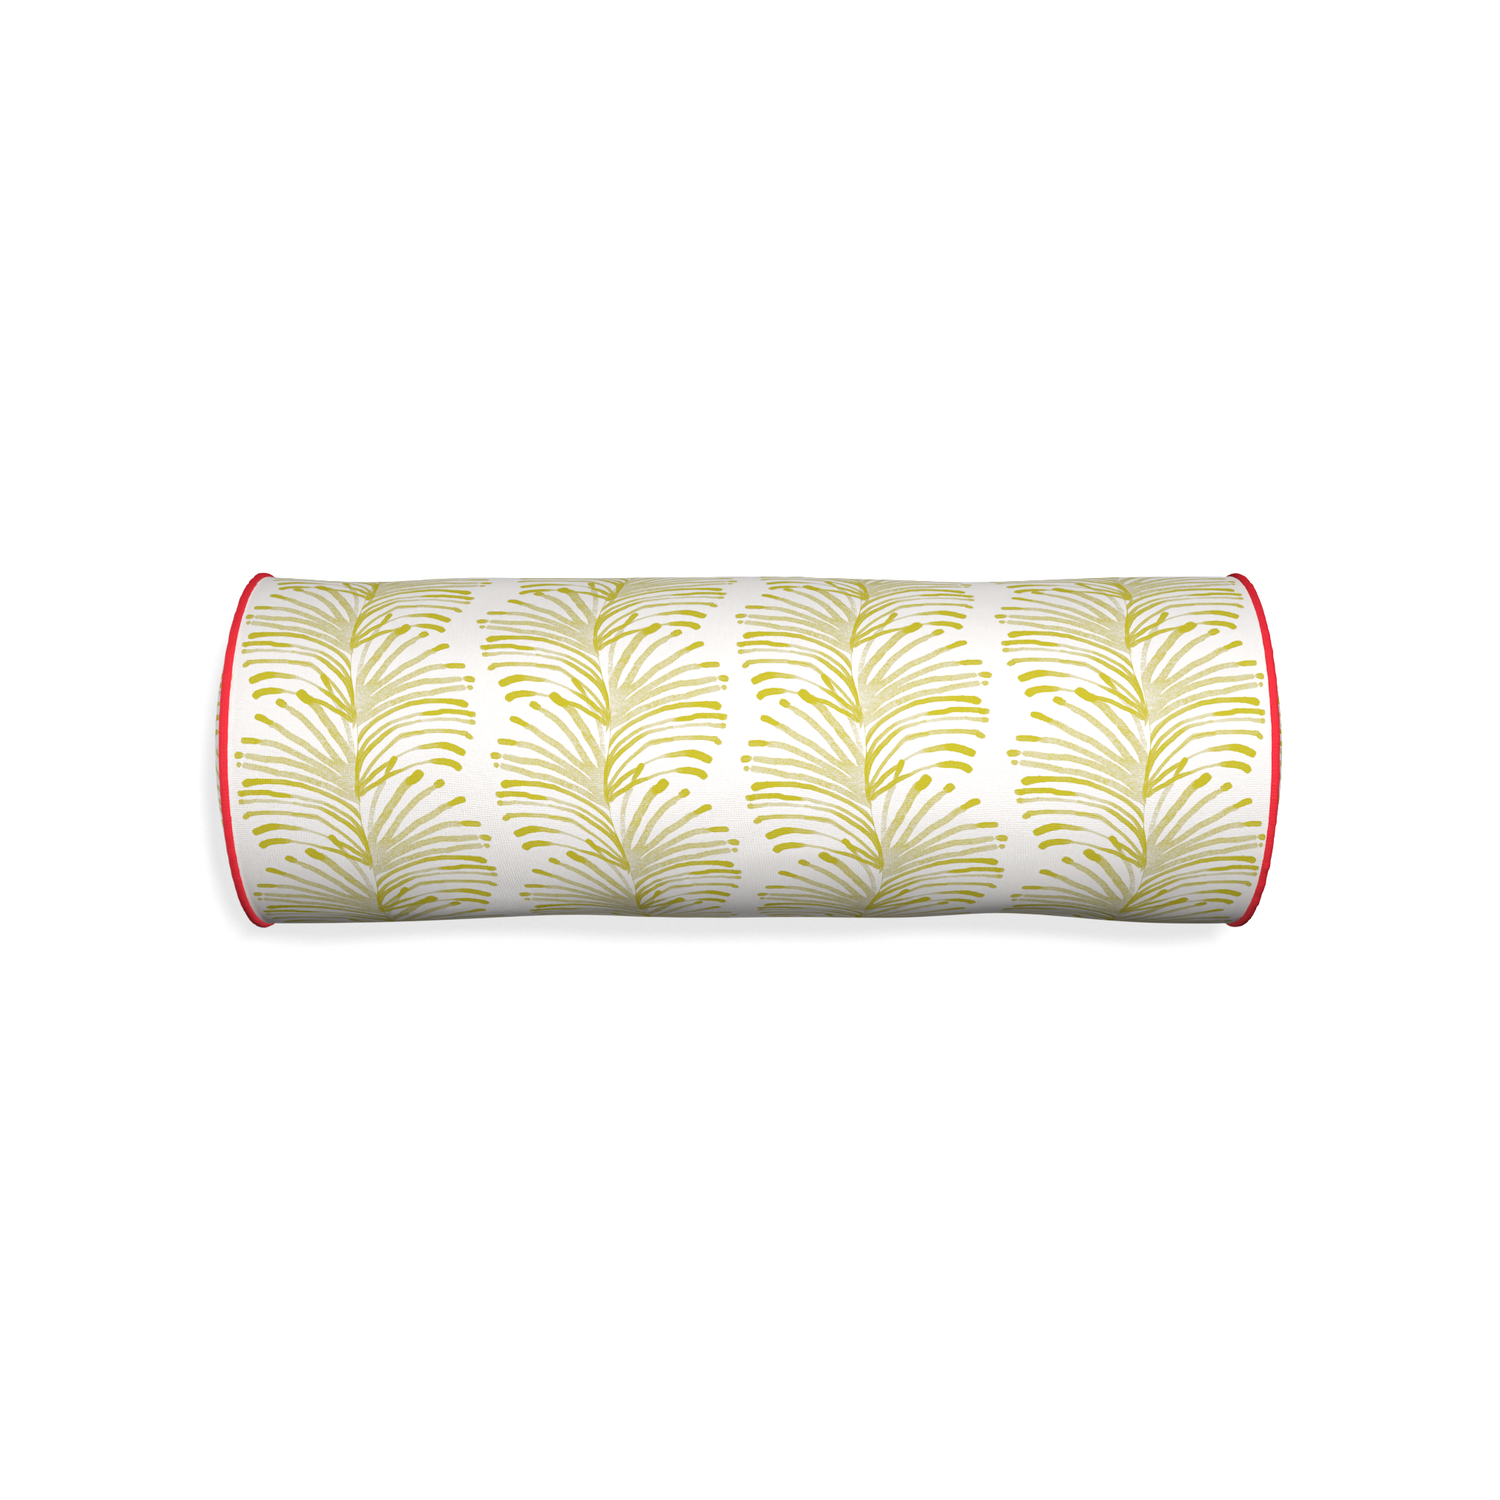 Bolster emma chartreuse custom pillow with cherry piping on white background